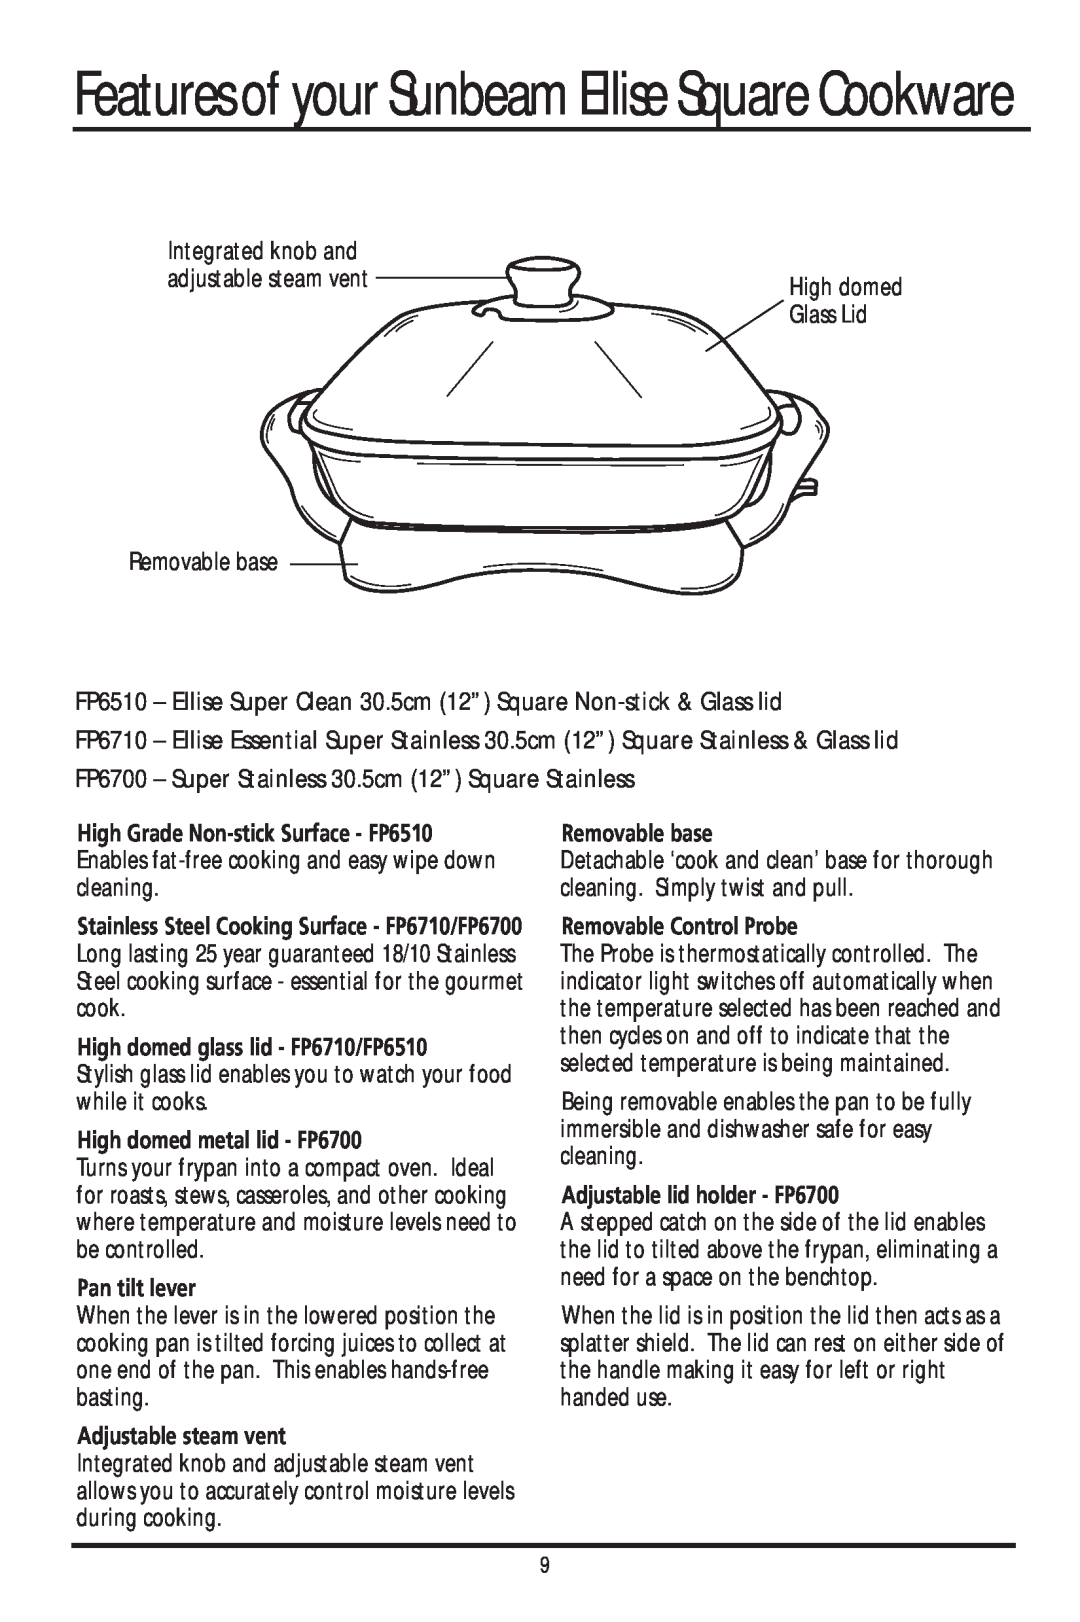 Sunbeam FP4500 manual Features of your Sunbeam Ellise Square Cookware, High domed glass lid - FP6710/FP6510, Pan tilt lever 